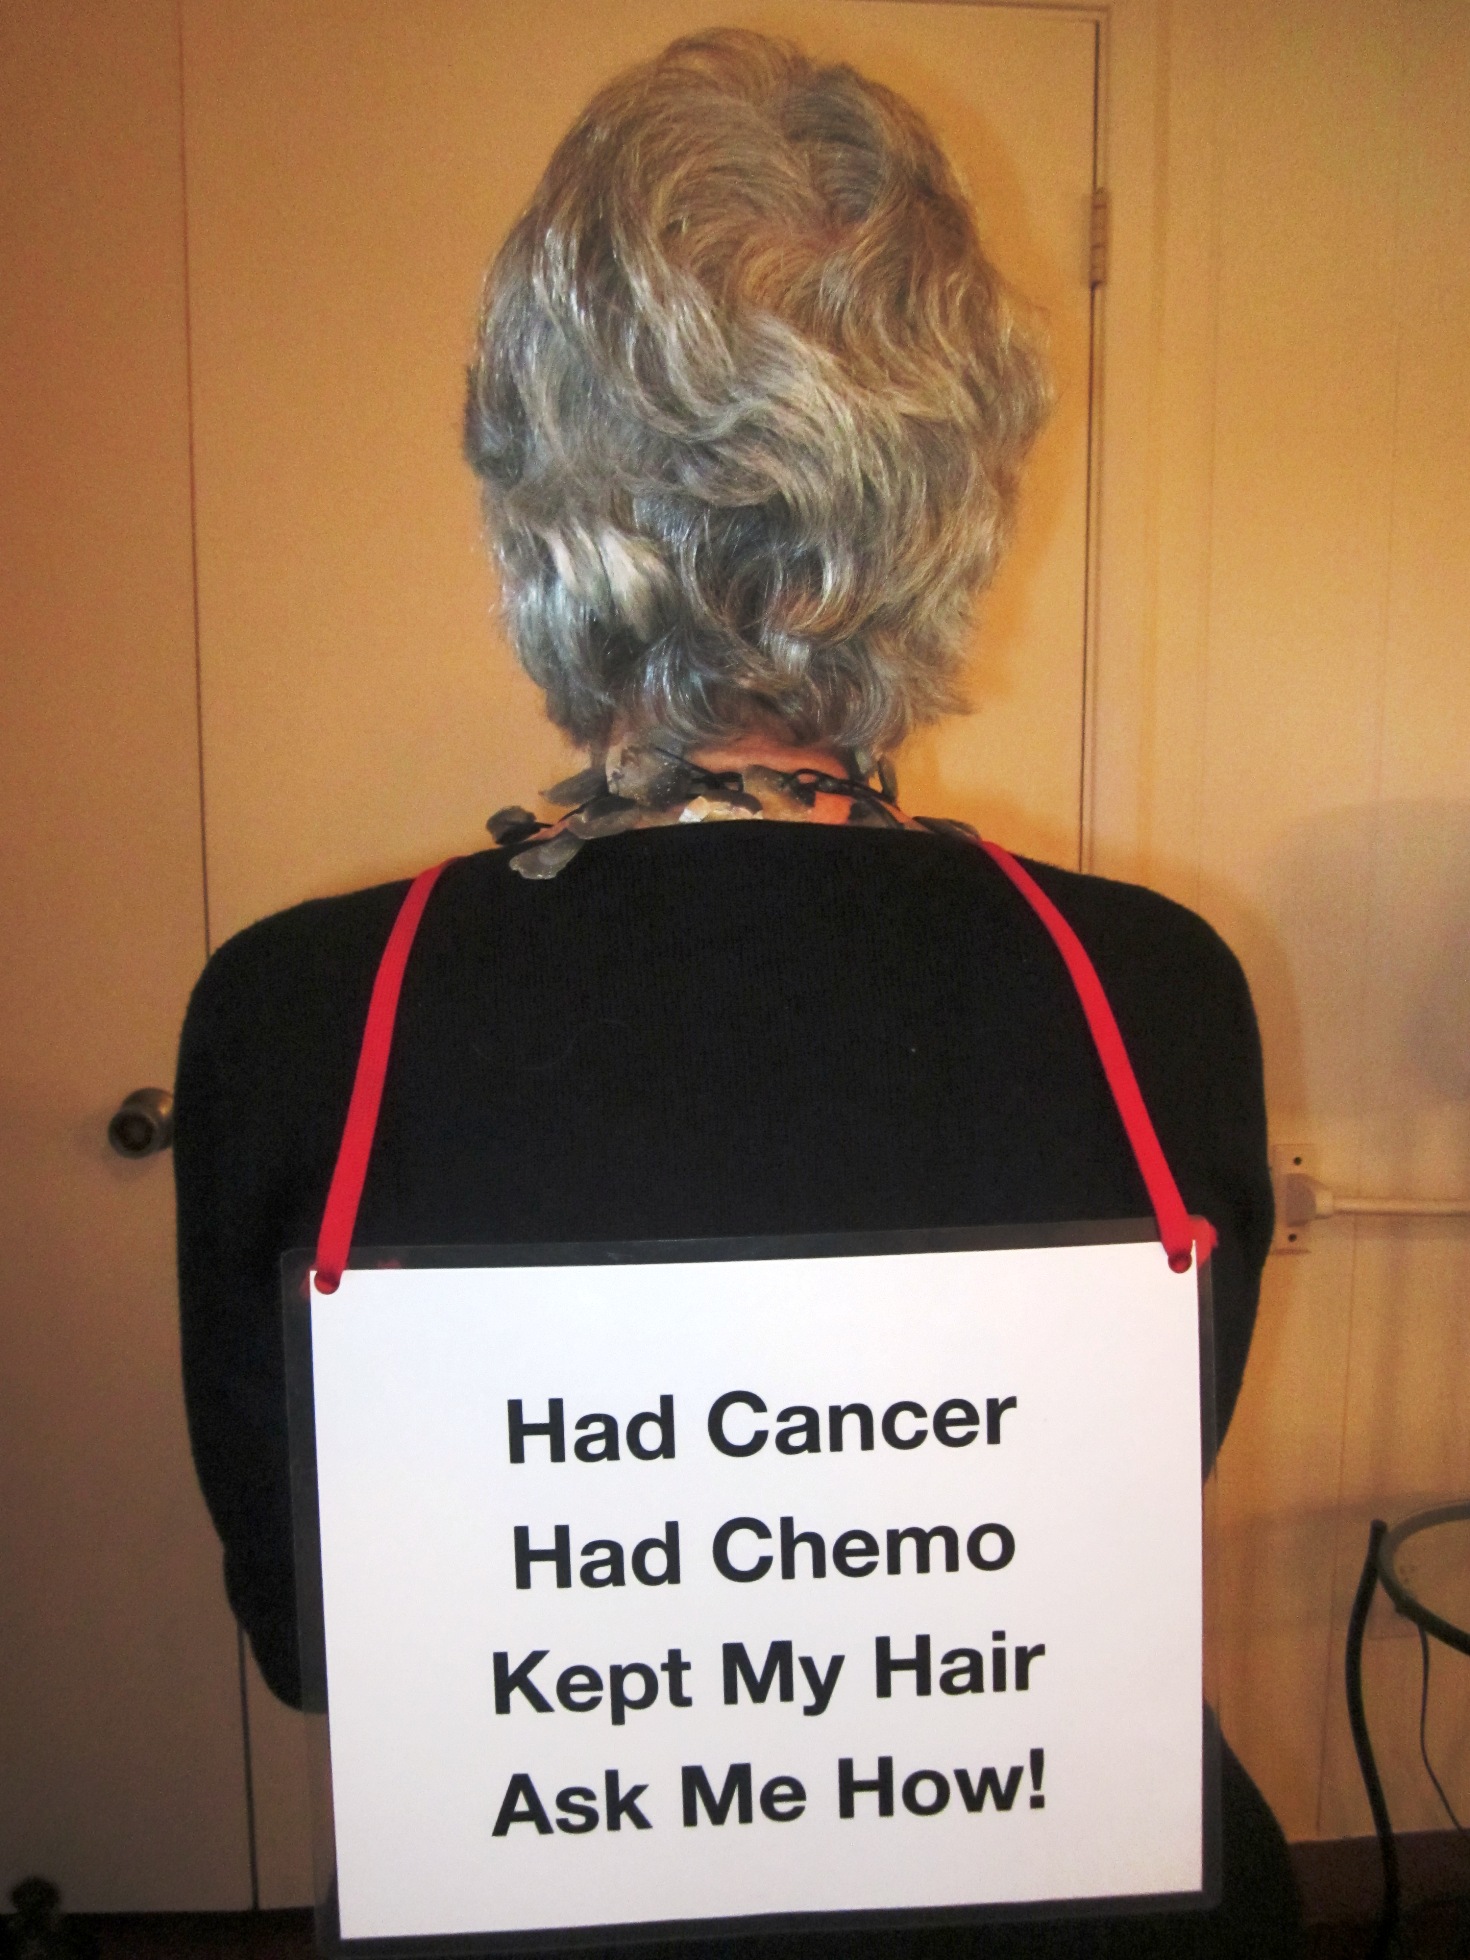 Had cancer, had chemo, kept my hair, ask me how!